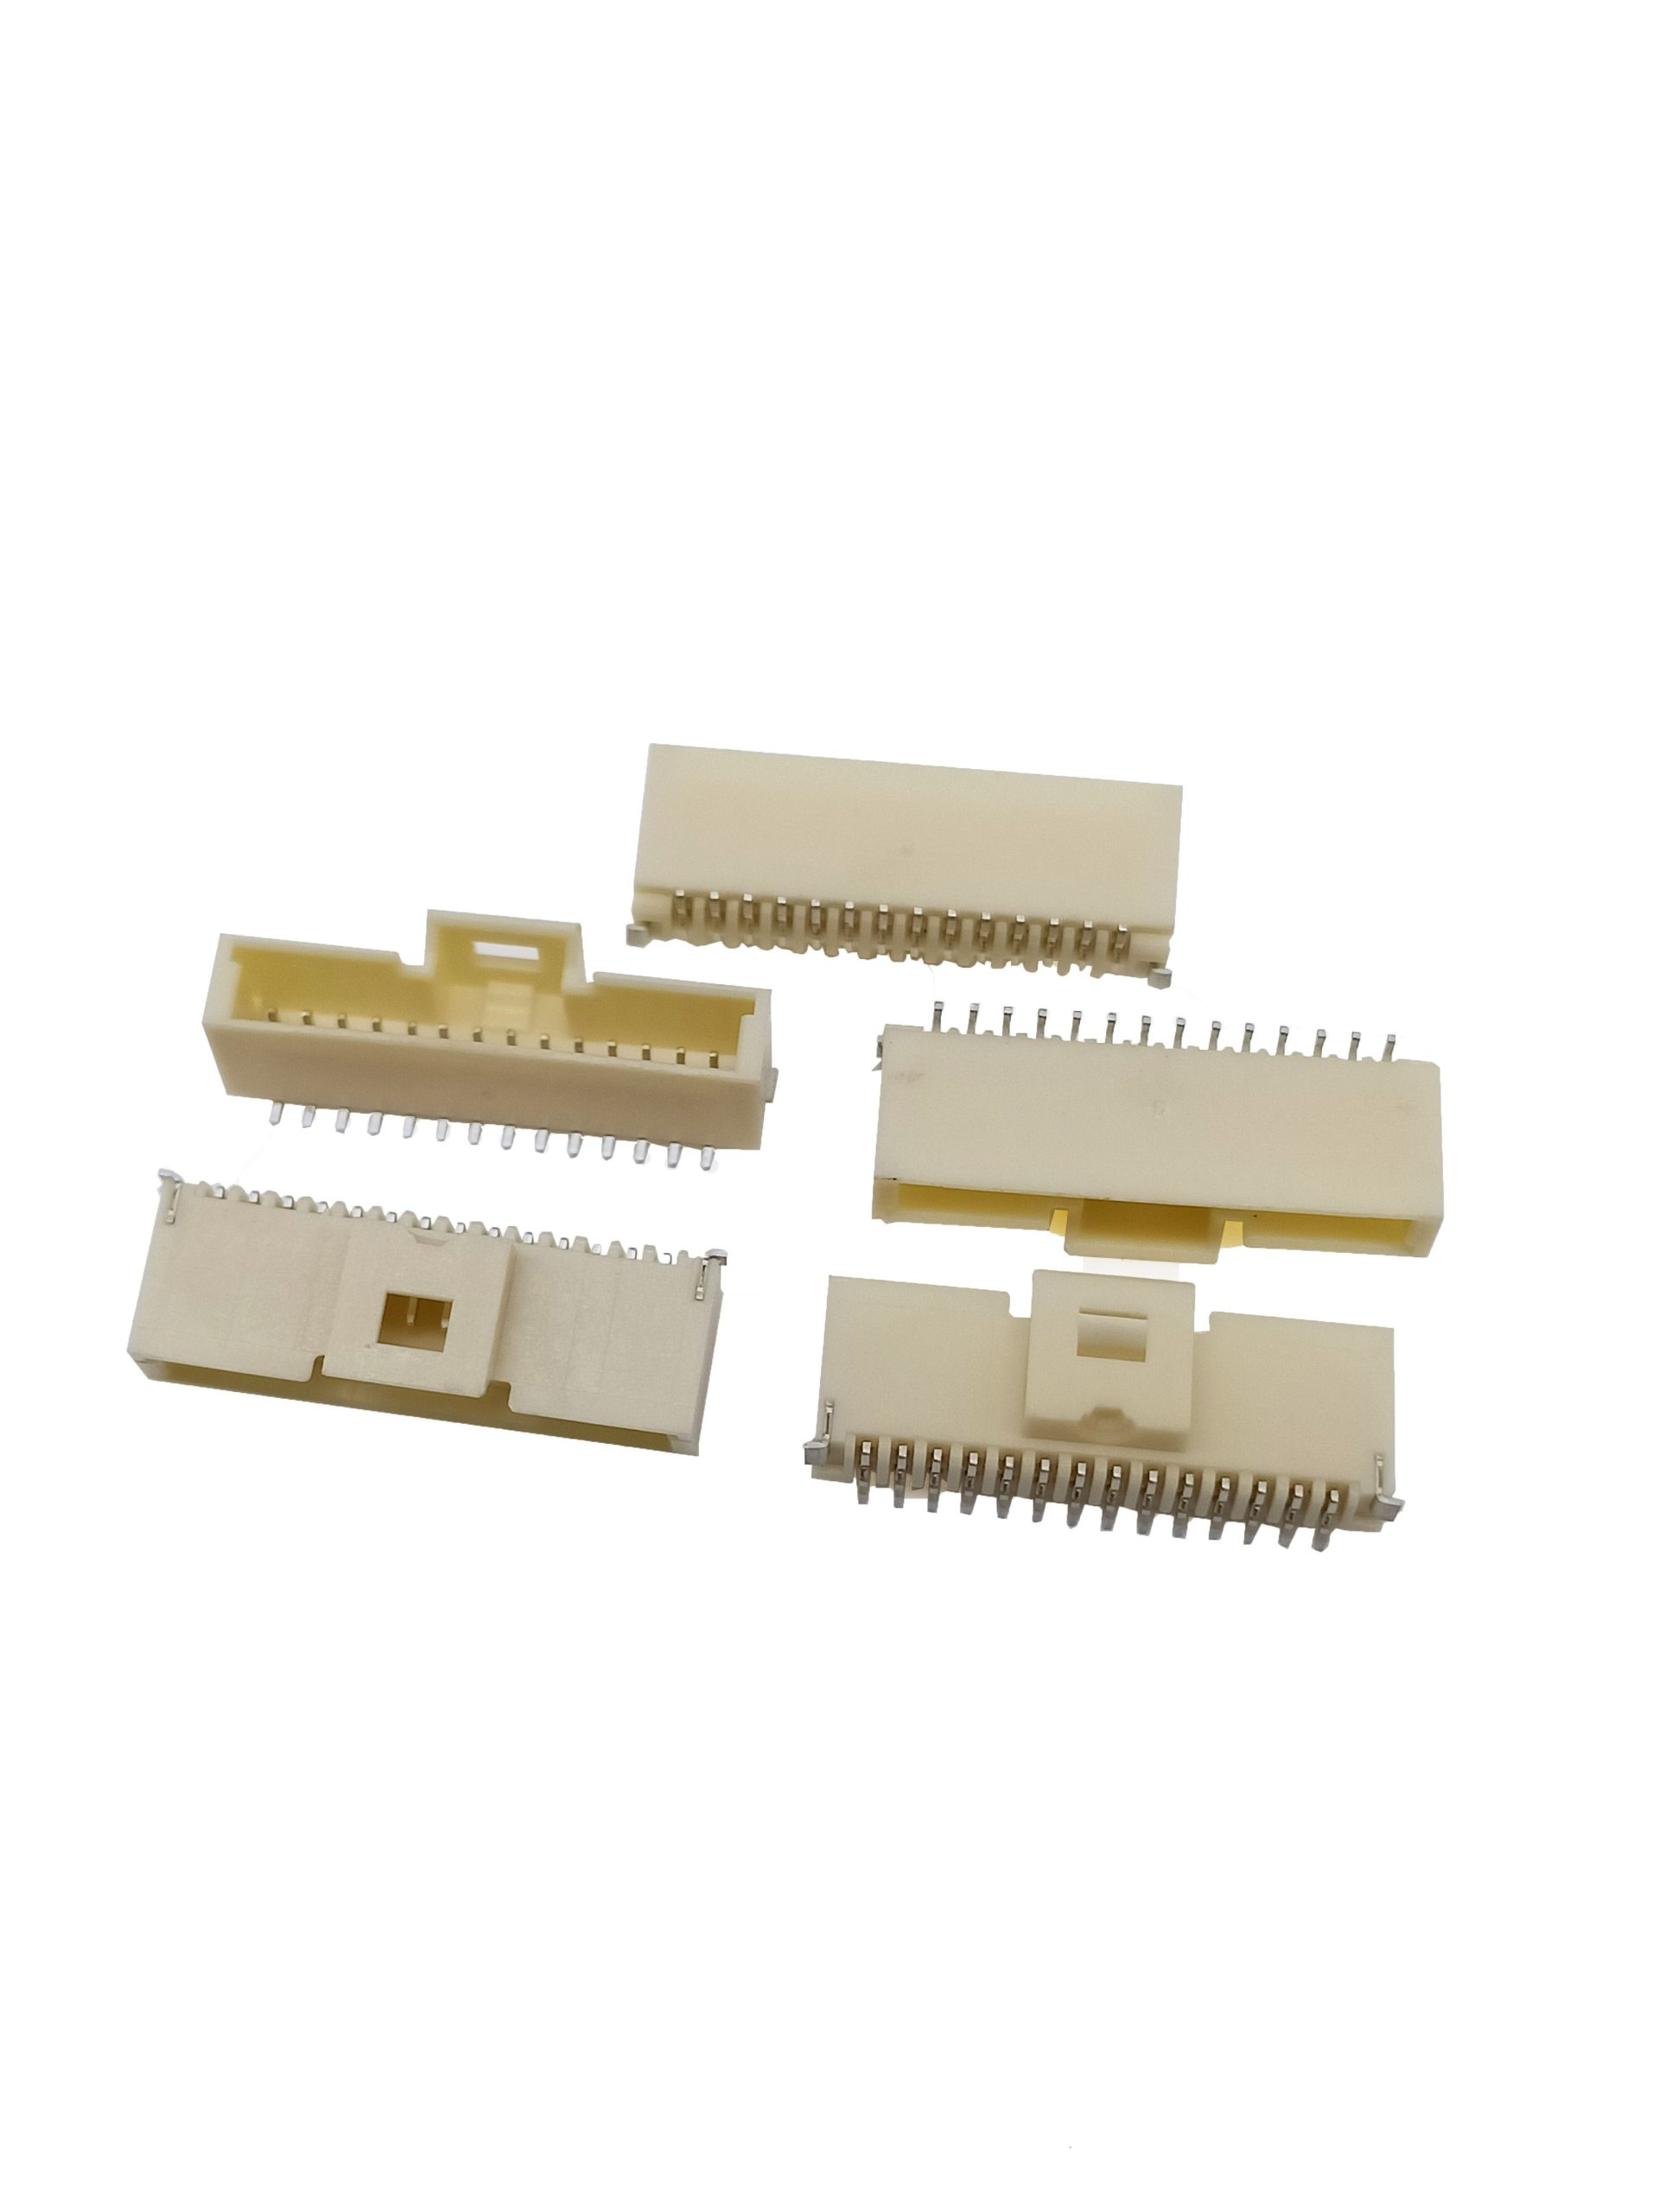 Breadboard wires are essential for prototyping, facilitating easy and secure connections on breadboards for electronics and circuit design.